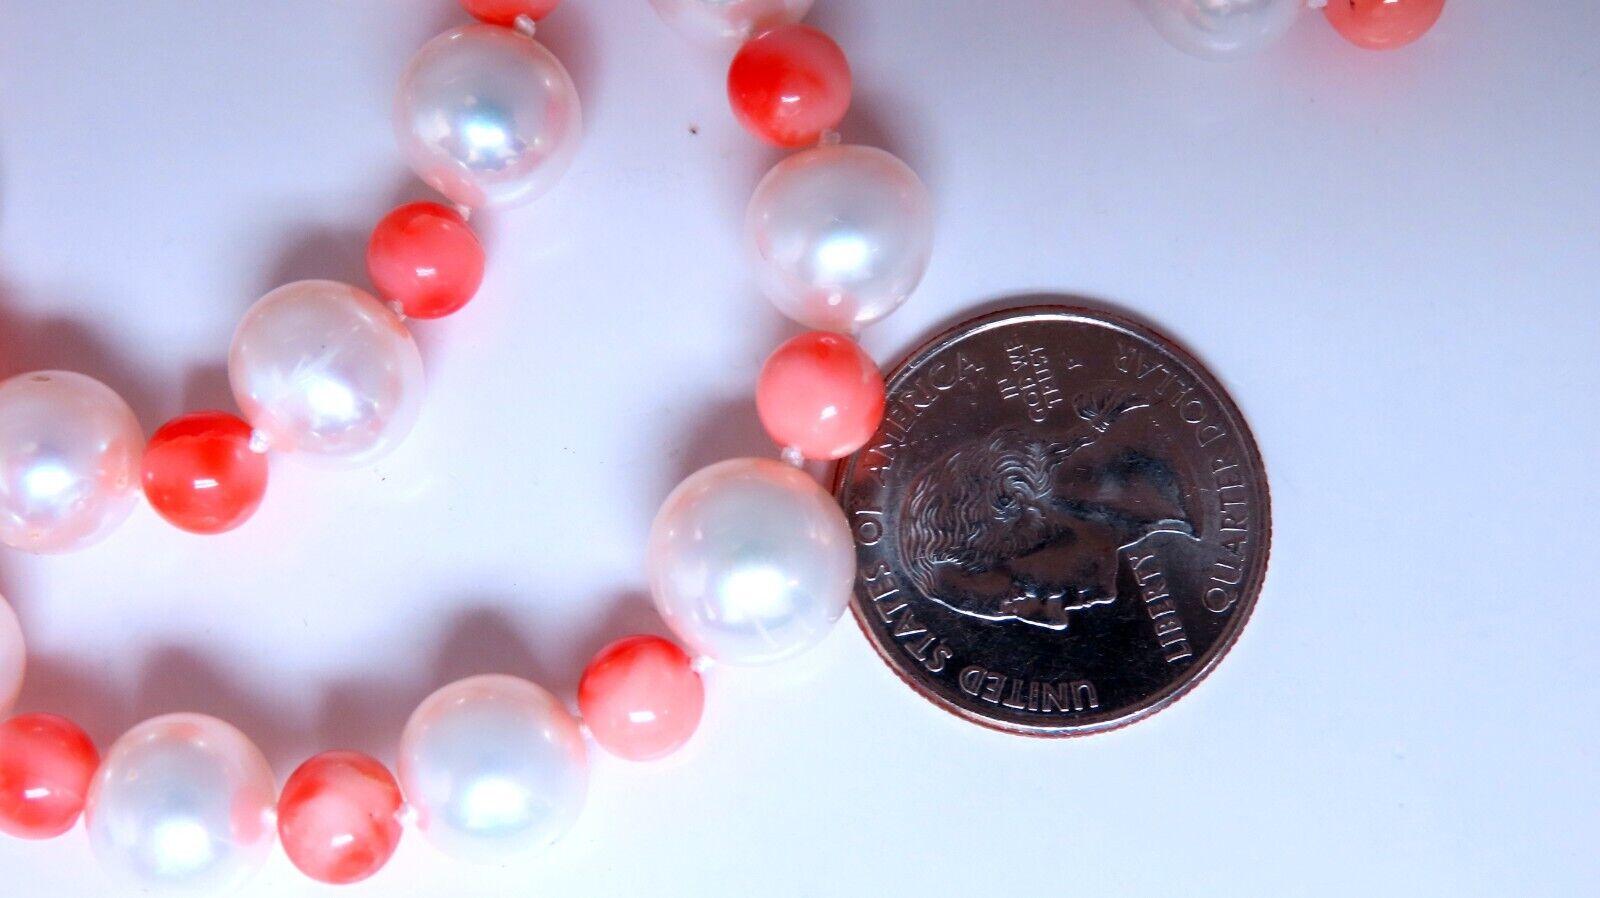 10mm Fresh Water Pearl Necklace.
Alternating with 7mm Coral Beads
14kt white gold Clasp
25 inches long
73 Grams